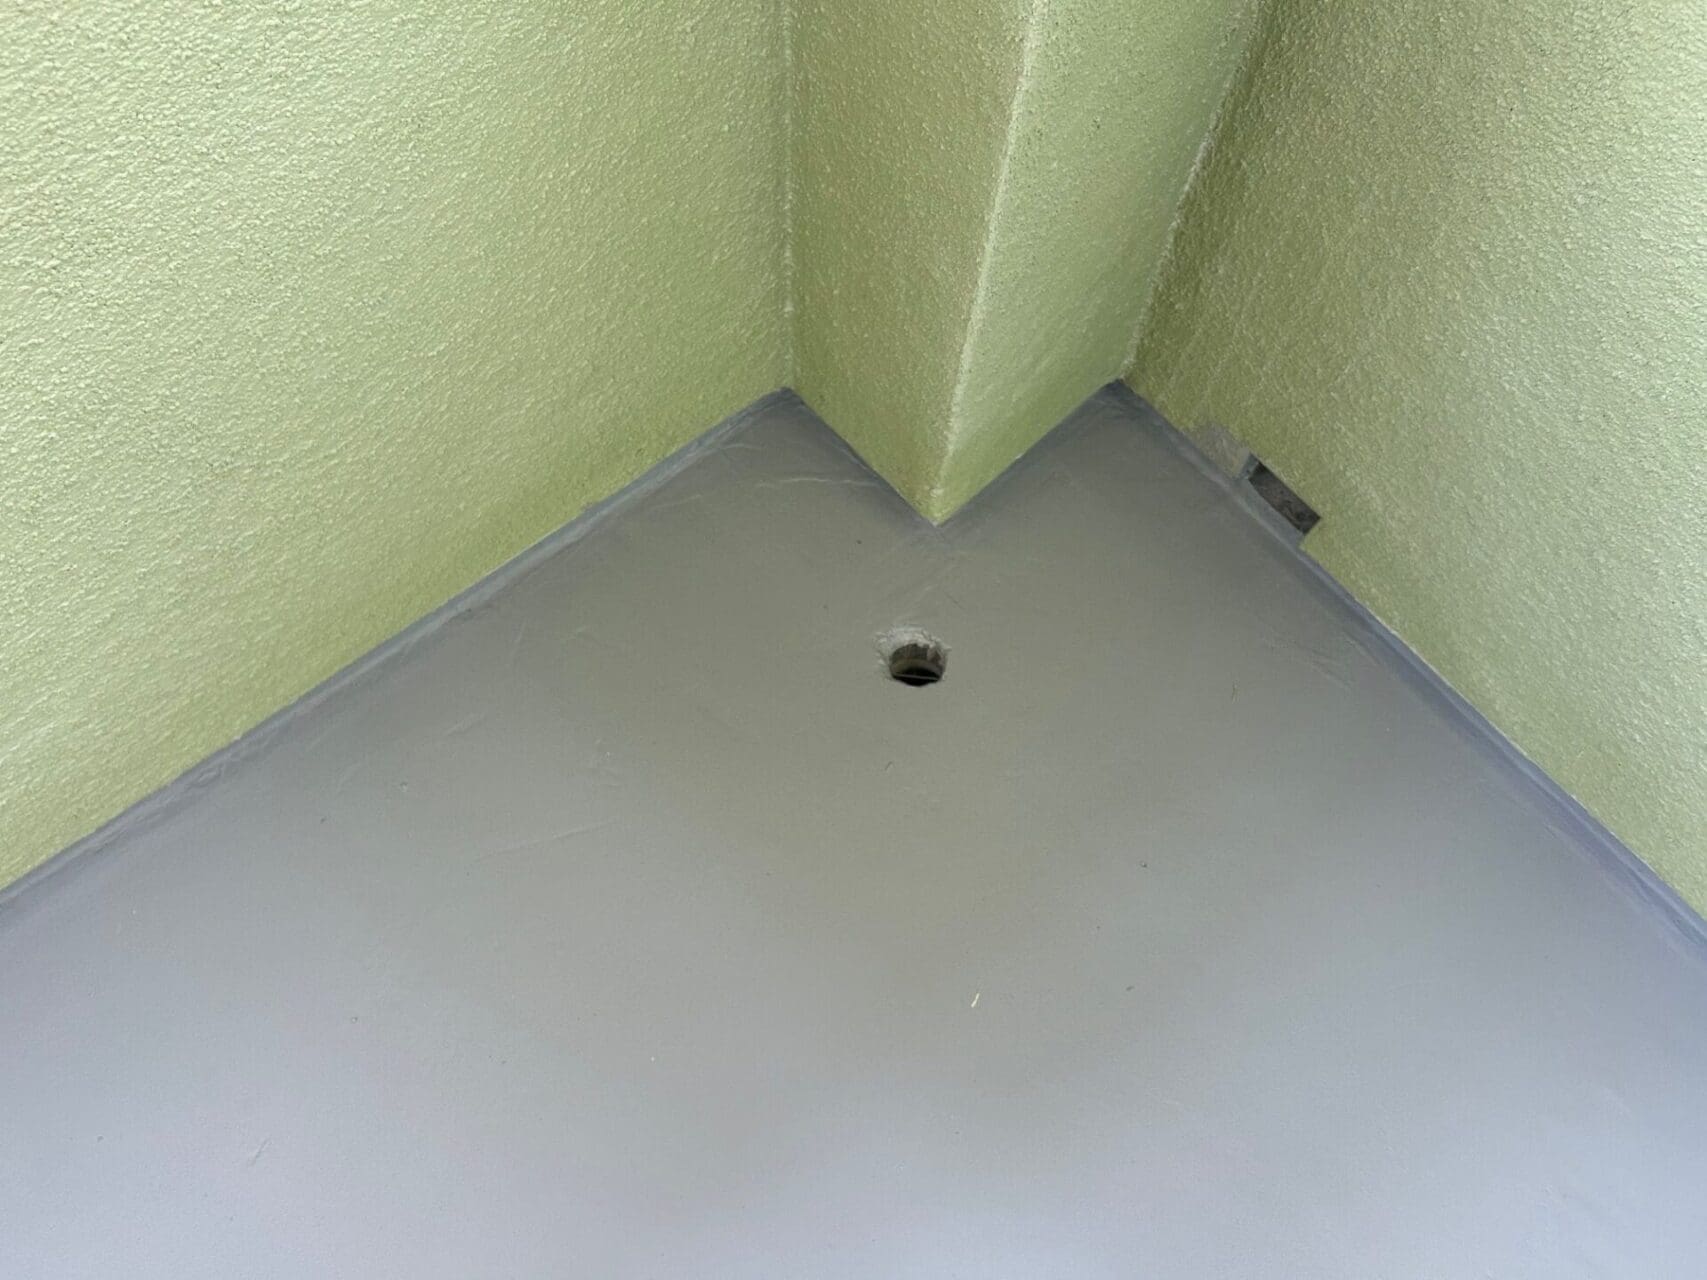 A hole in the floor of a bathroom stall.